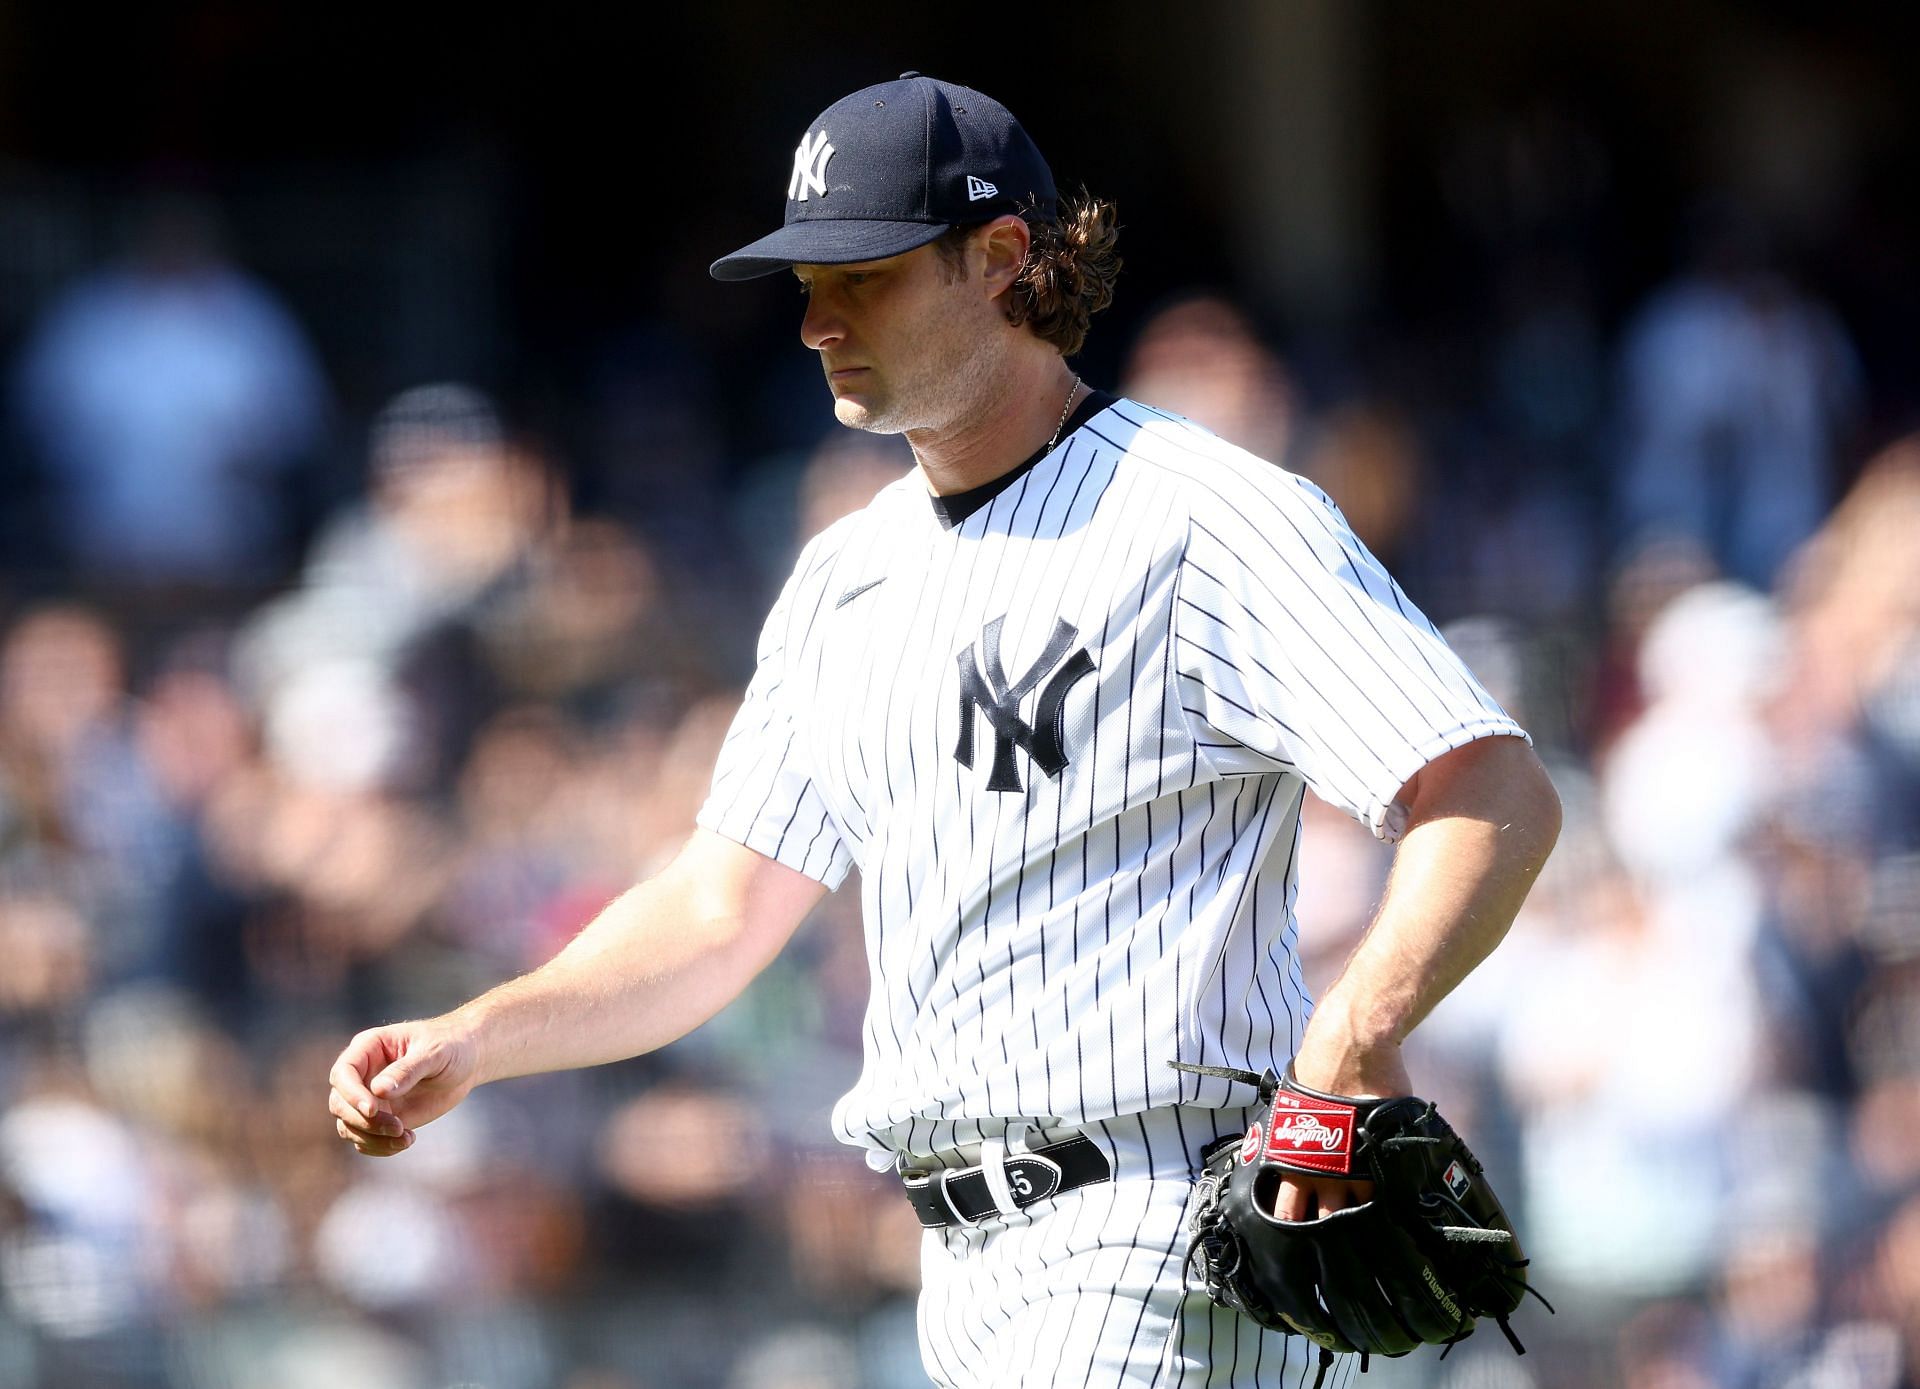 New York Yankees SP Gerrit Cole has struck out 51 batters this season